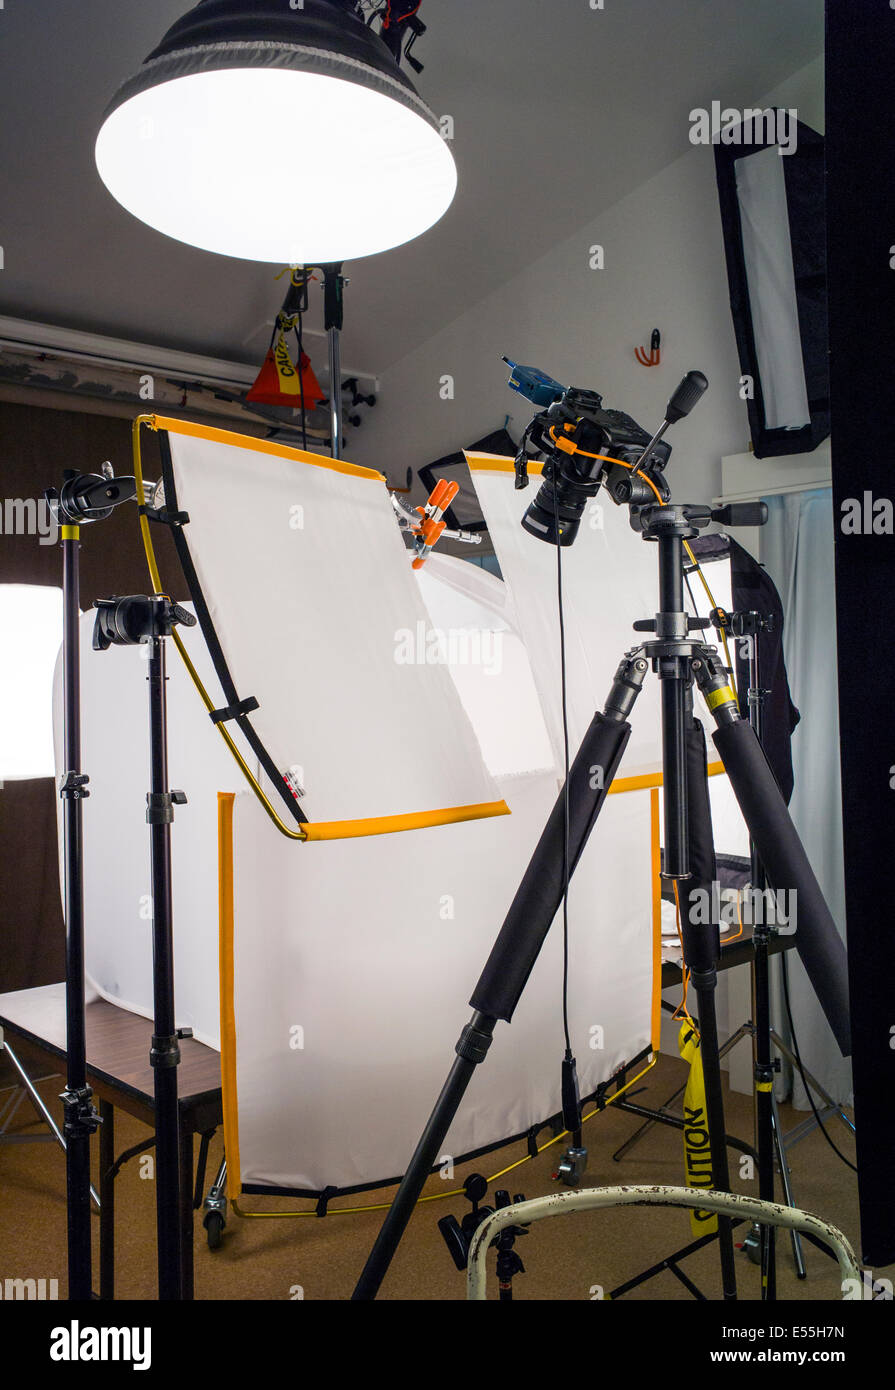 Commercial photography studio, including lighting, background and grip gear. Stock Photo